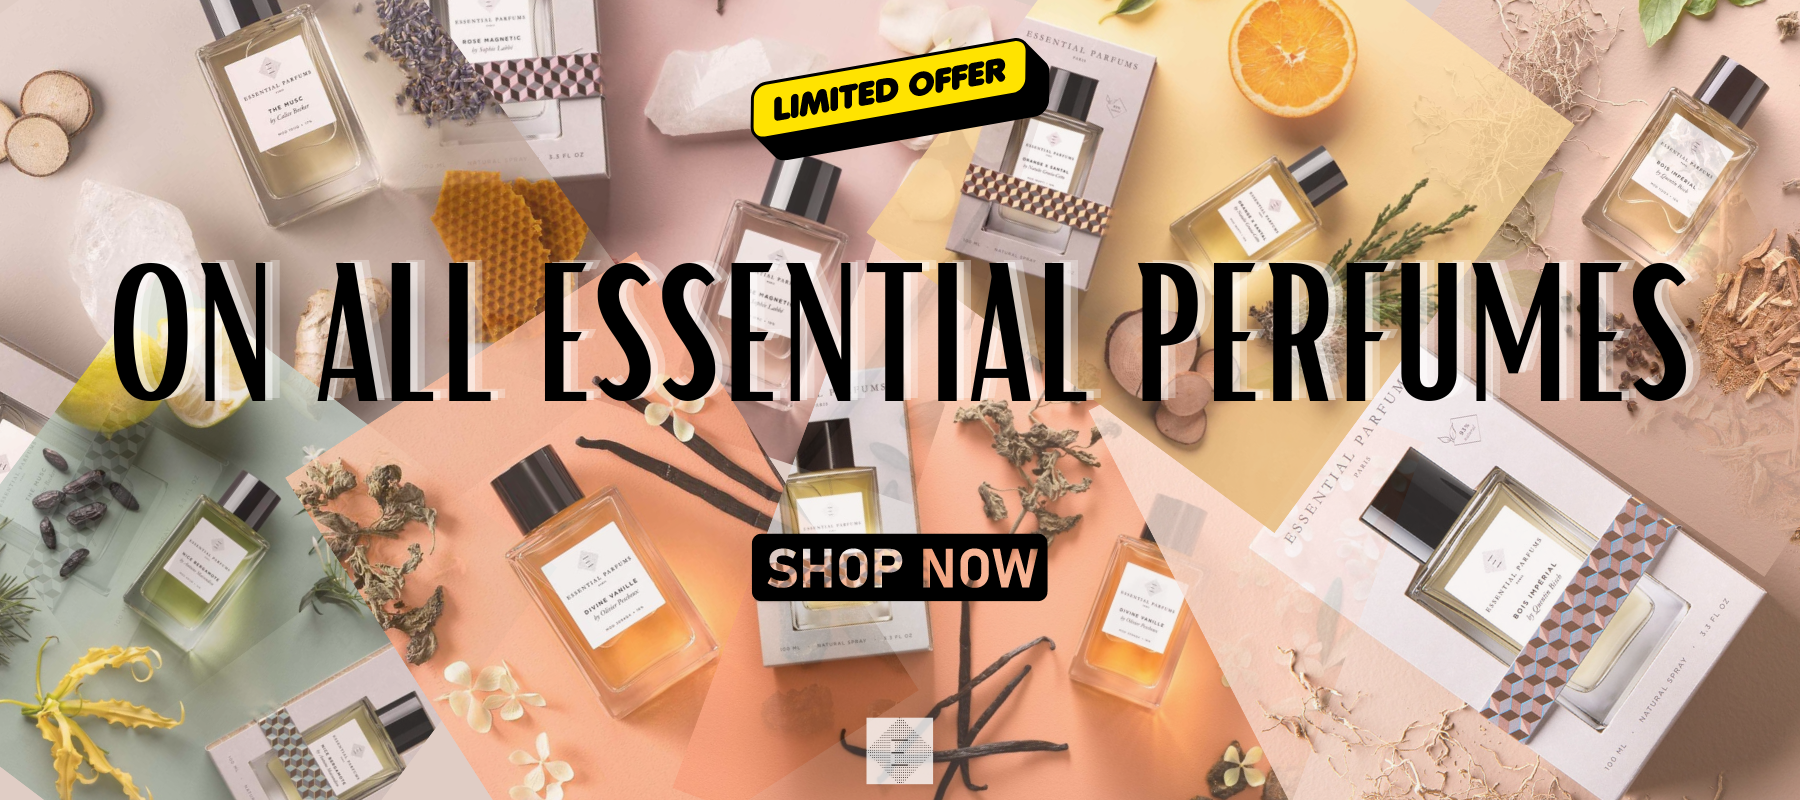 Essential perfumes banner